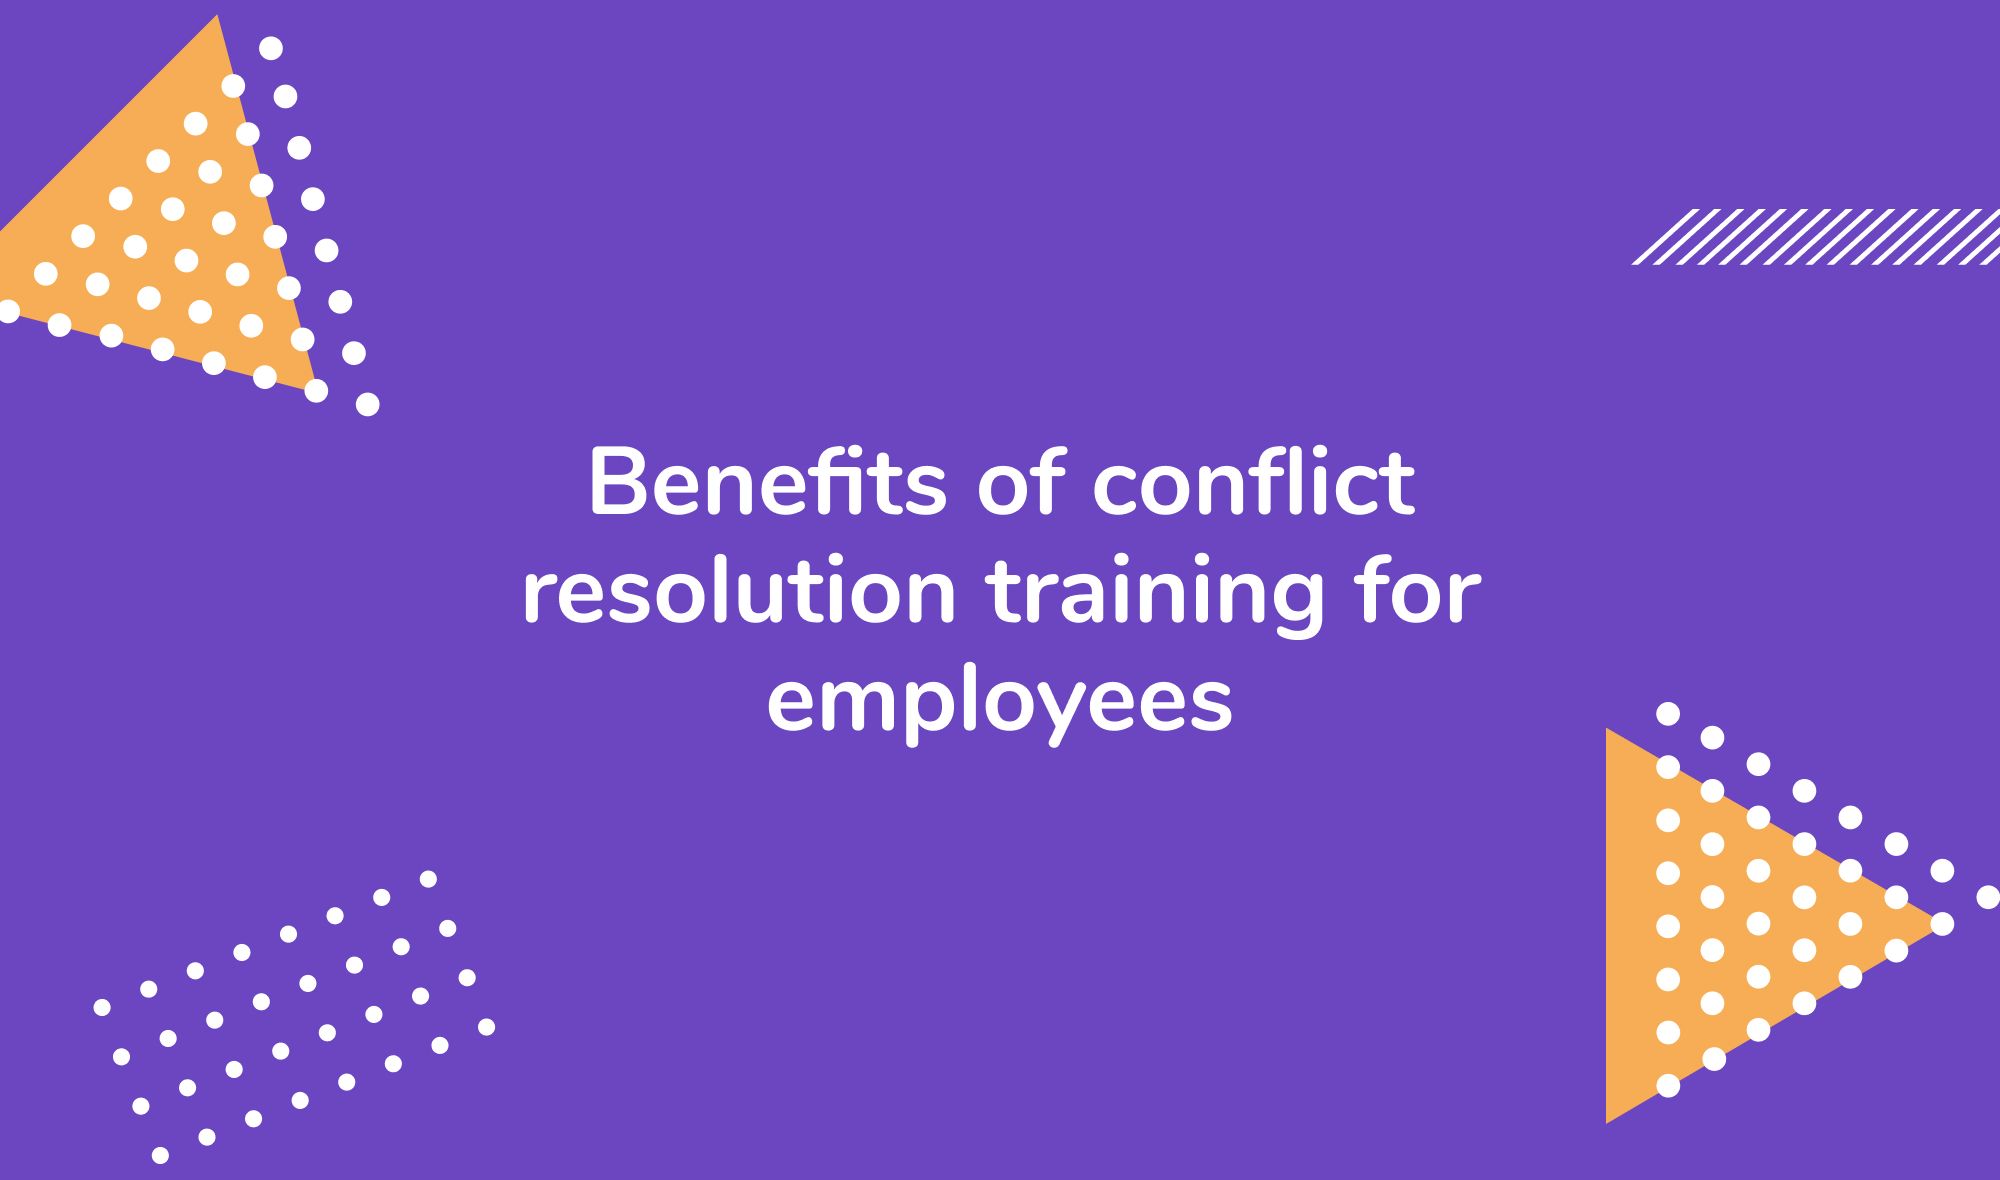 Benefits of conflict resolution training for employees